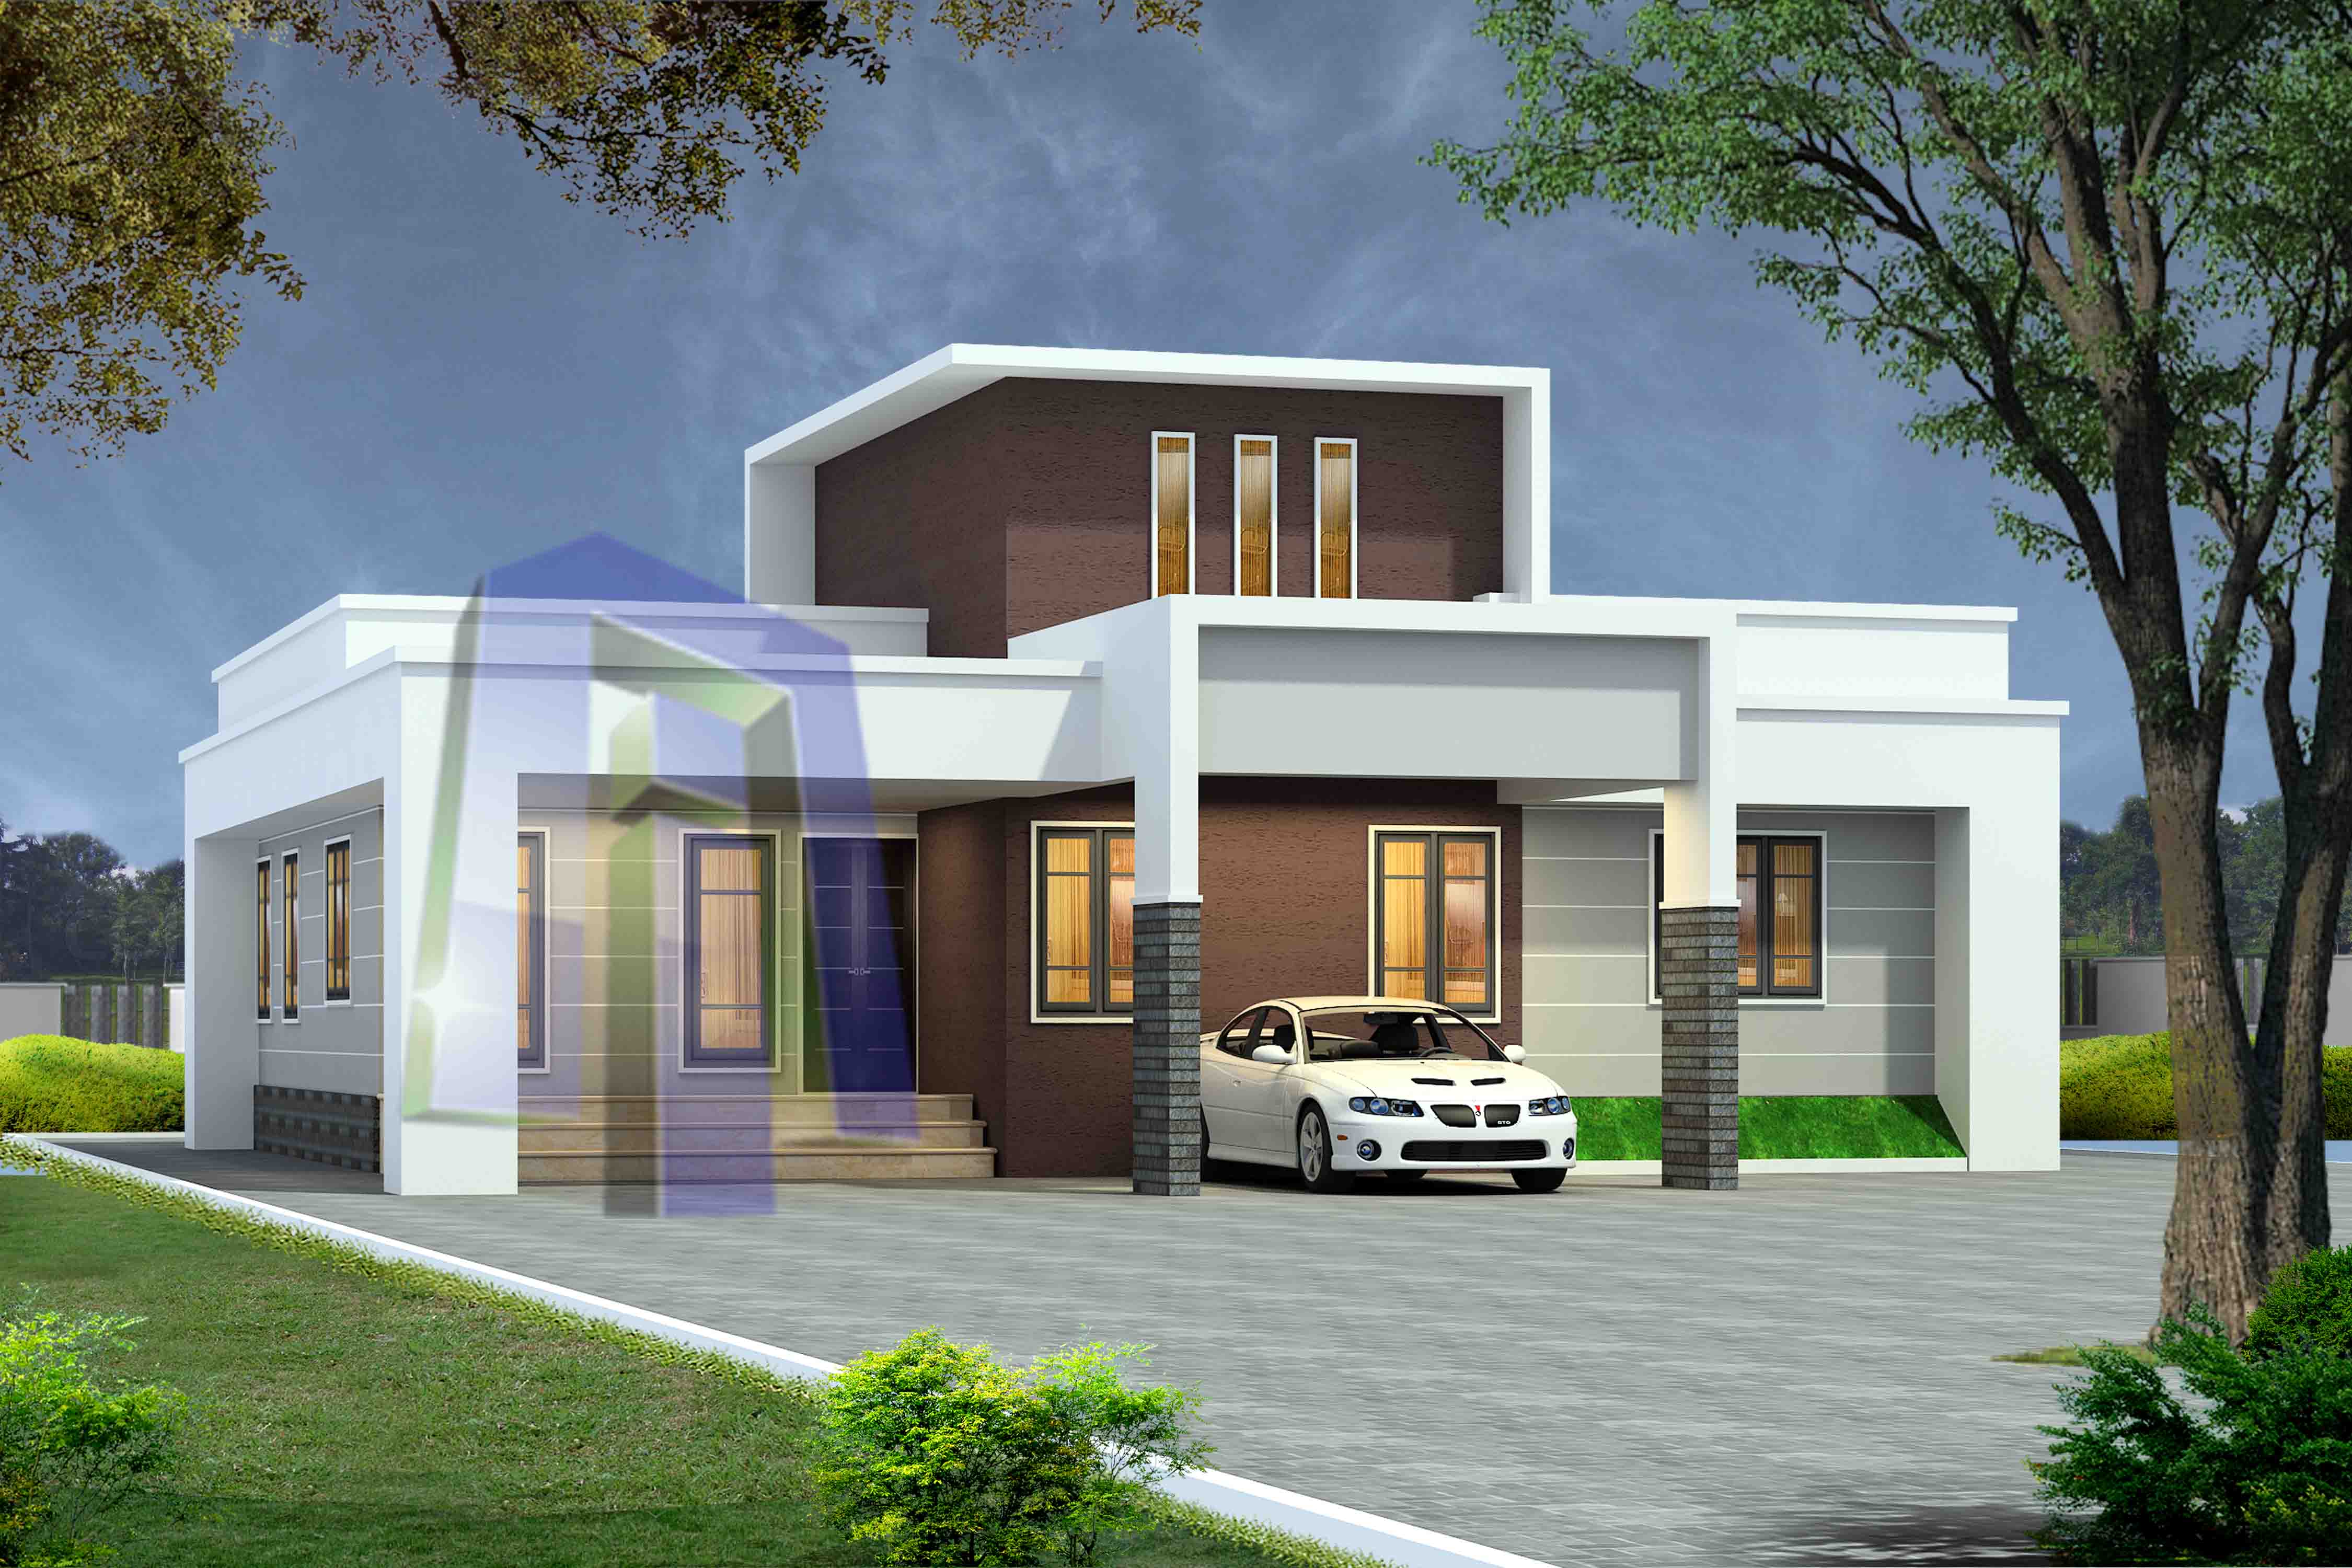 2 Bedroom House Plan Indian Style 1000 Sq Ft House Plans With Front Elevation Kerala Style House Plans Kerala Home Plans Kerala House Design Indian House Plans